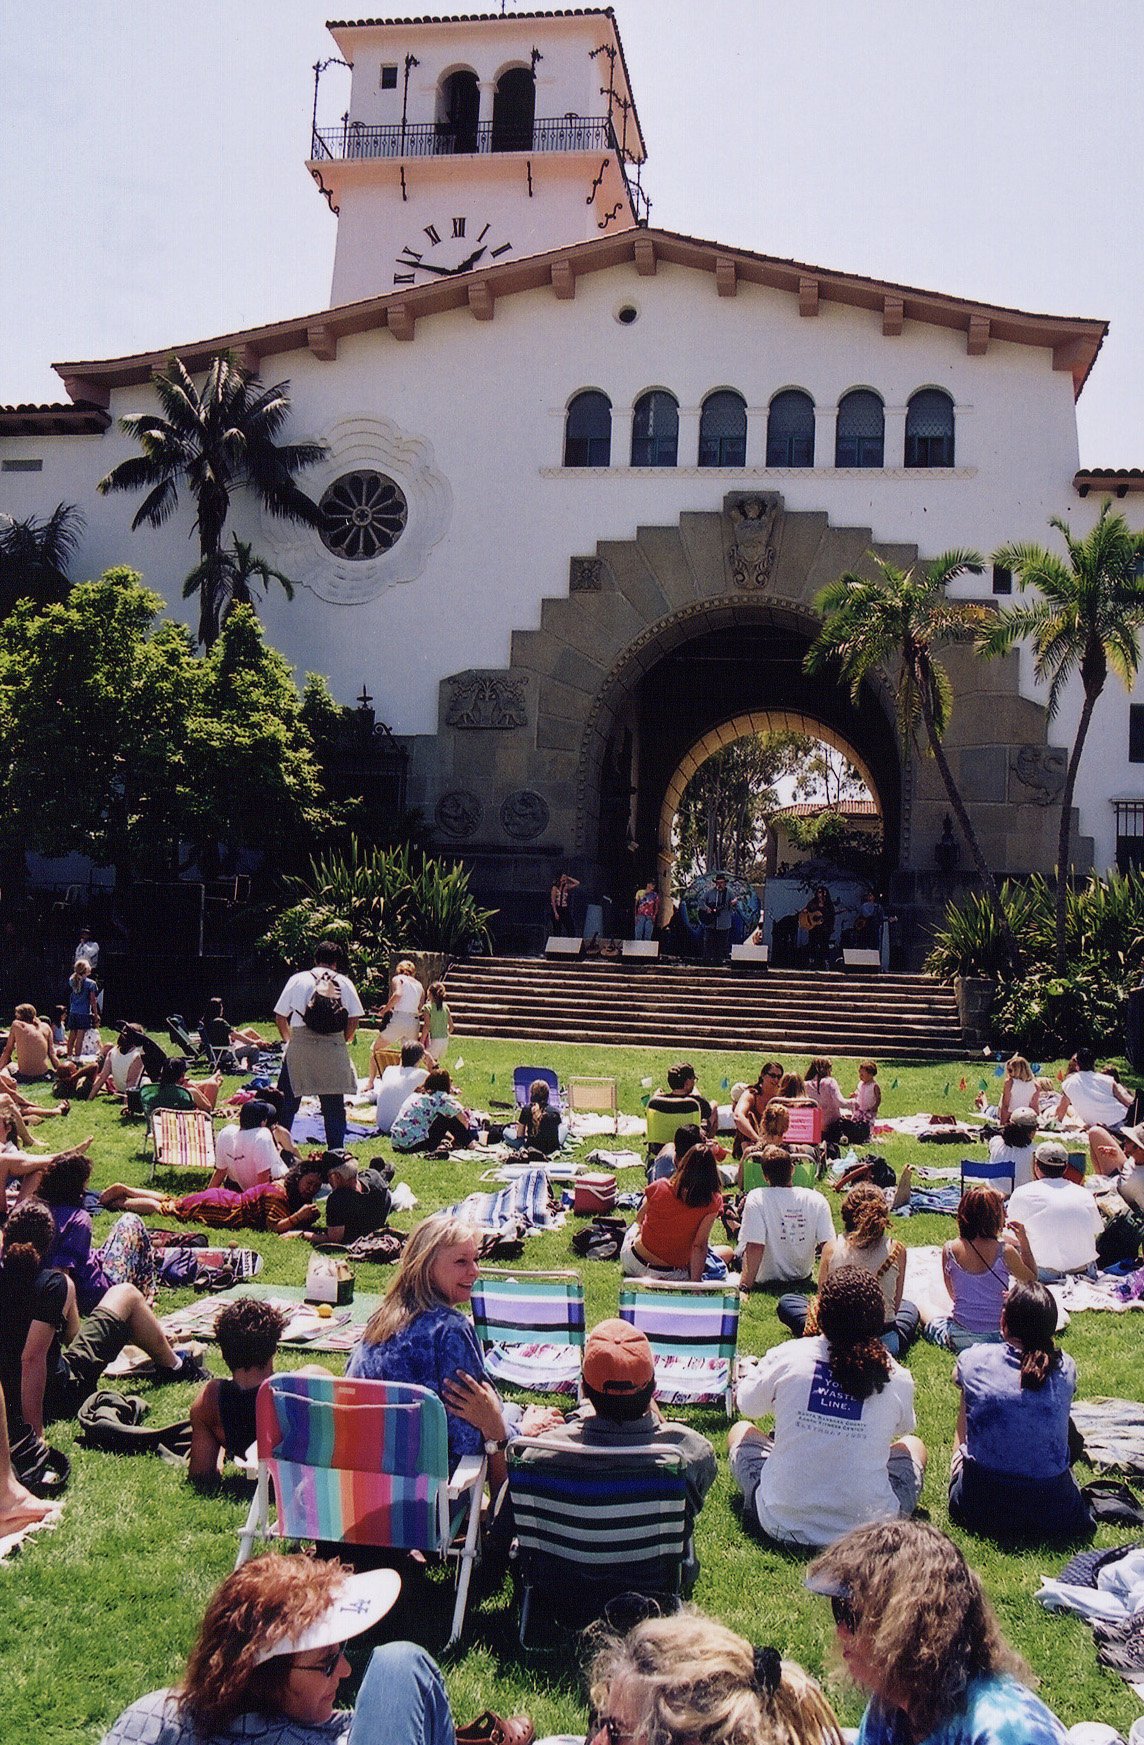  Crowds in front of the Santa Barbara Courthouse 